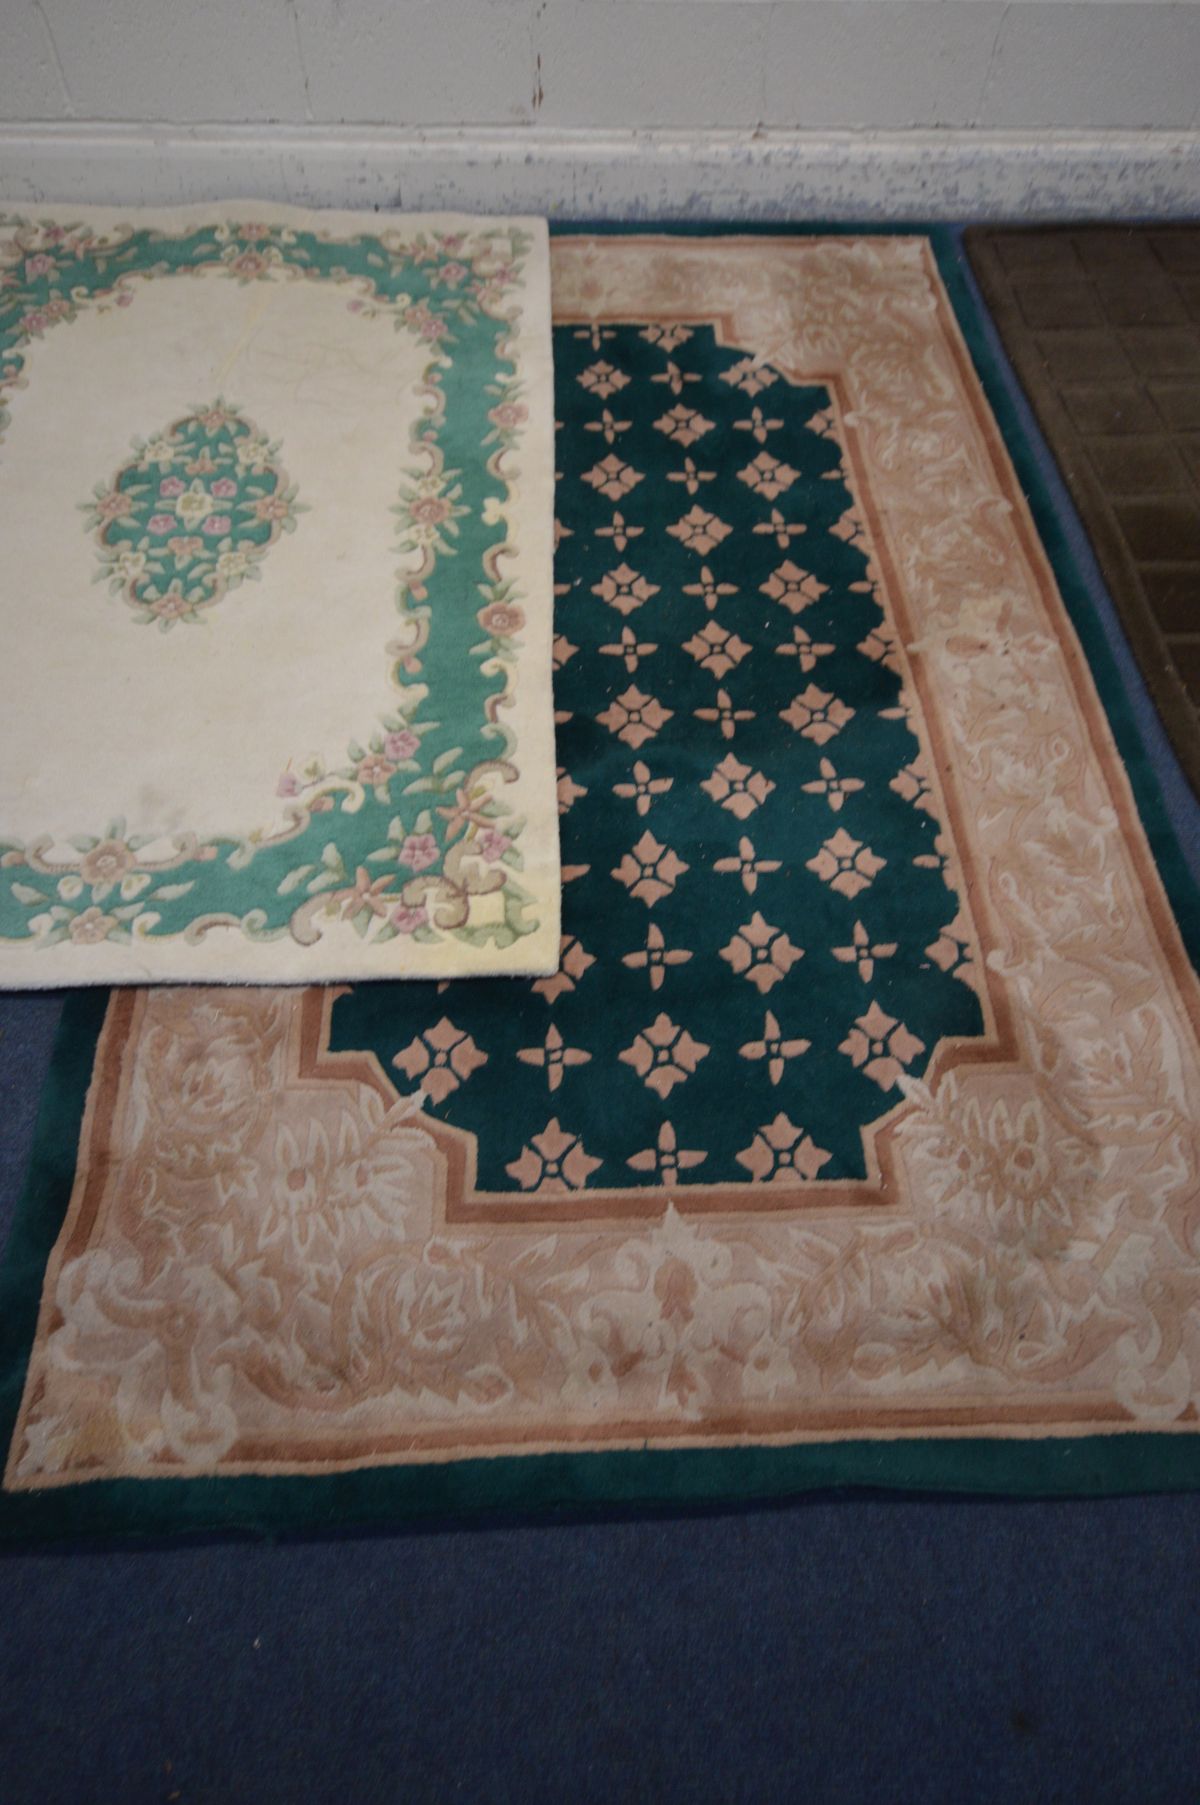 A LARGE GREEN CHINESE WOOLEN RUG, 240cm x 150cm, two similar cream and green ground rugs, both 180cm - Image 3 of 4